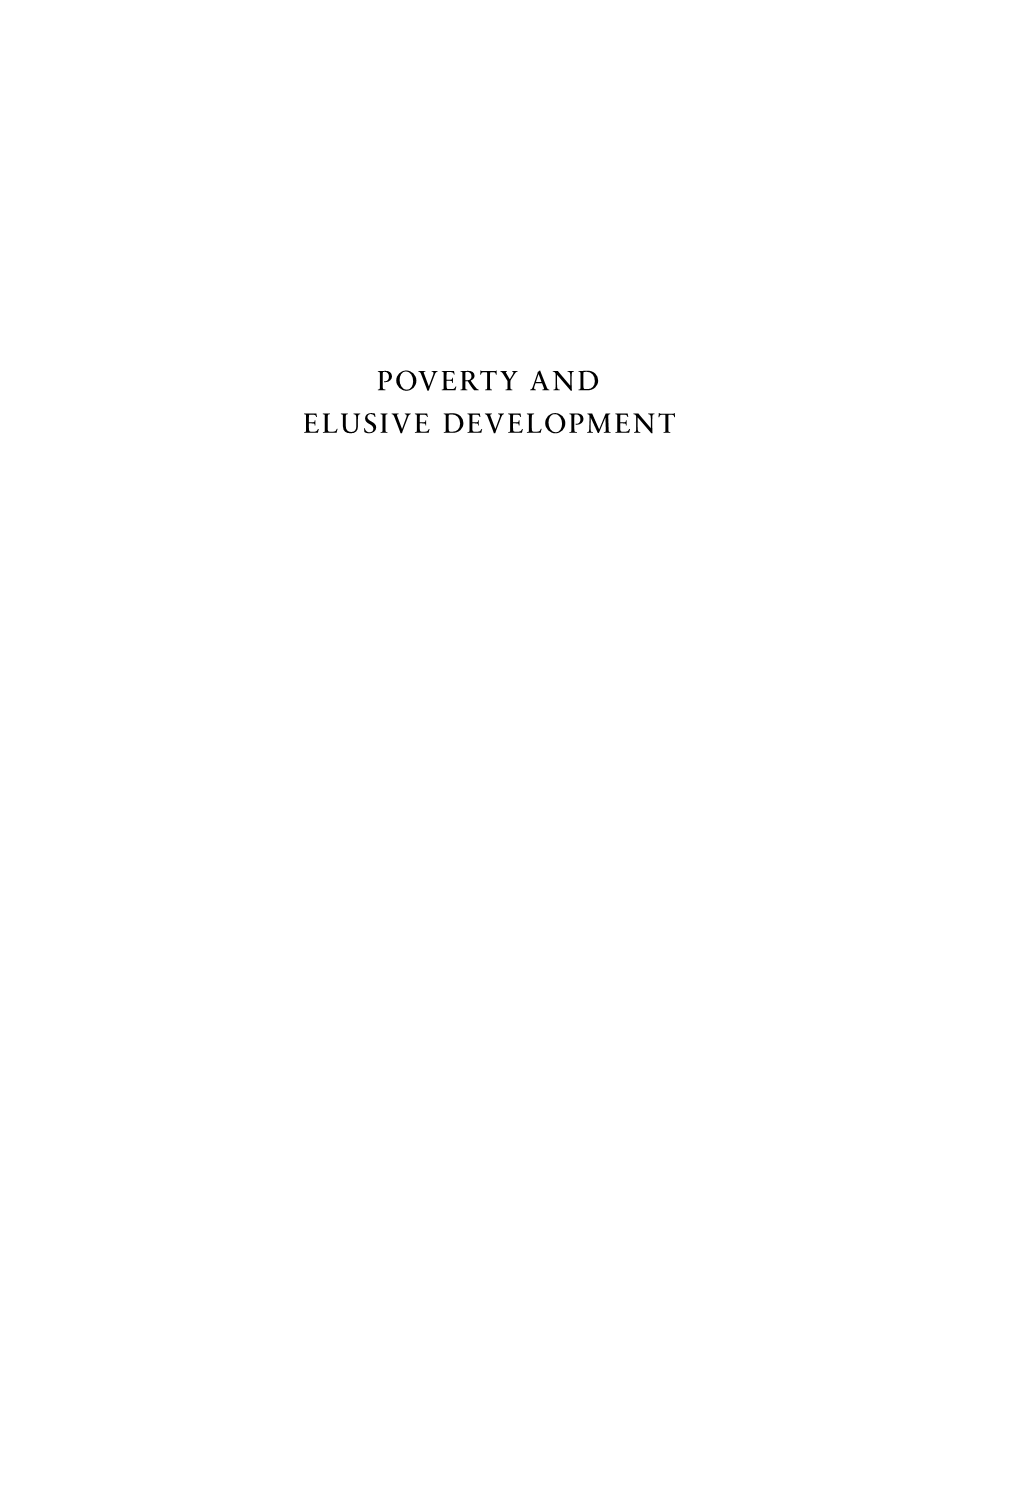 100298 Poverty and Elusive Developement BM 100101 V2.Indd